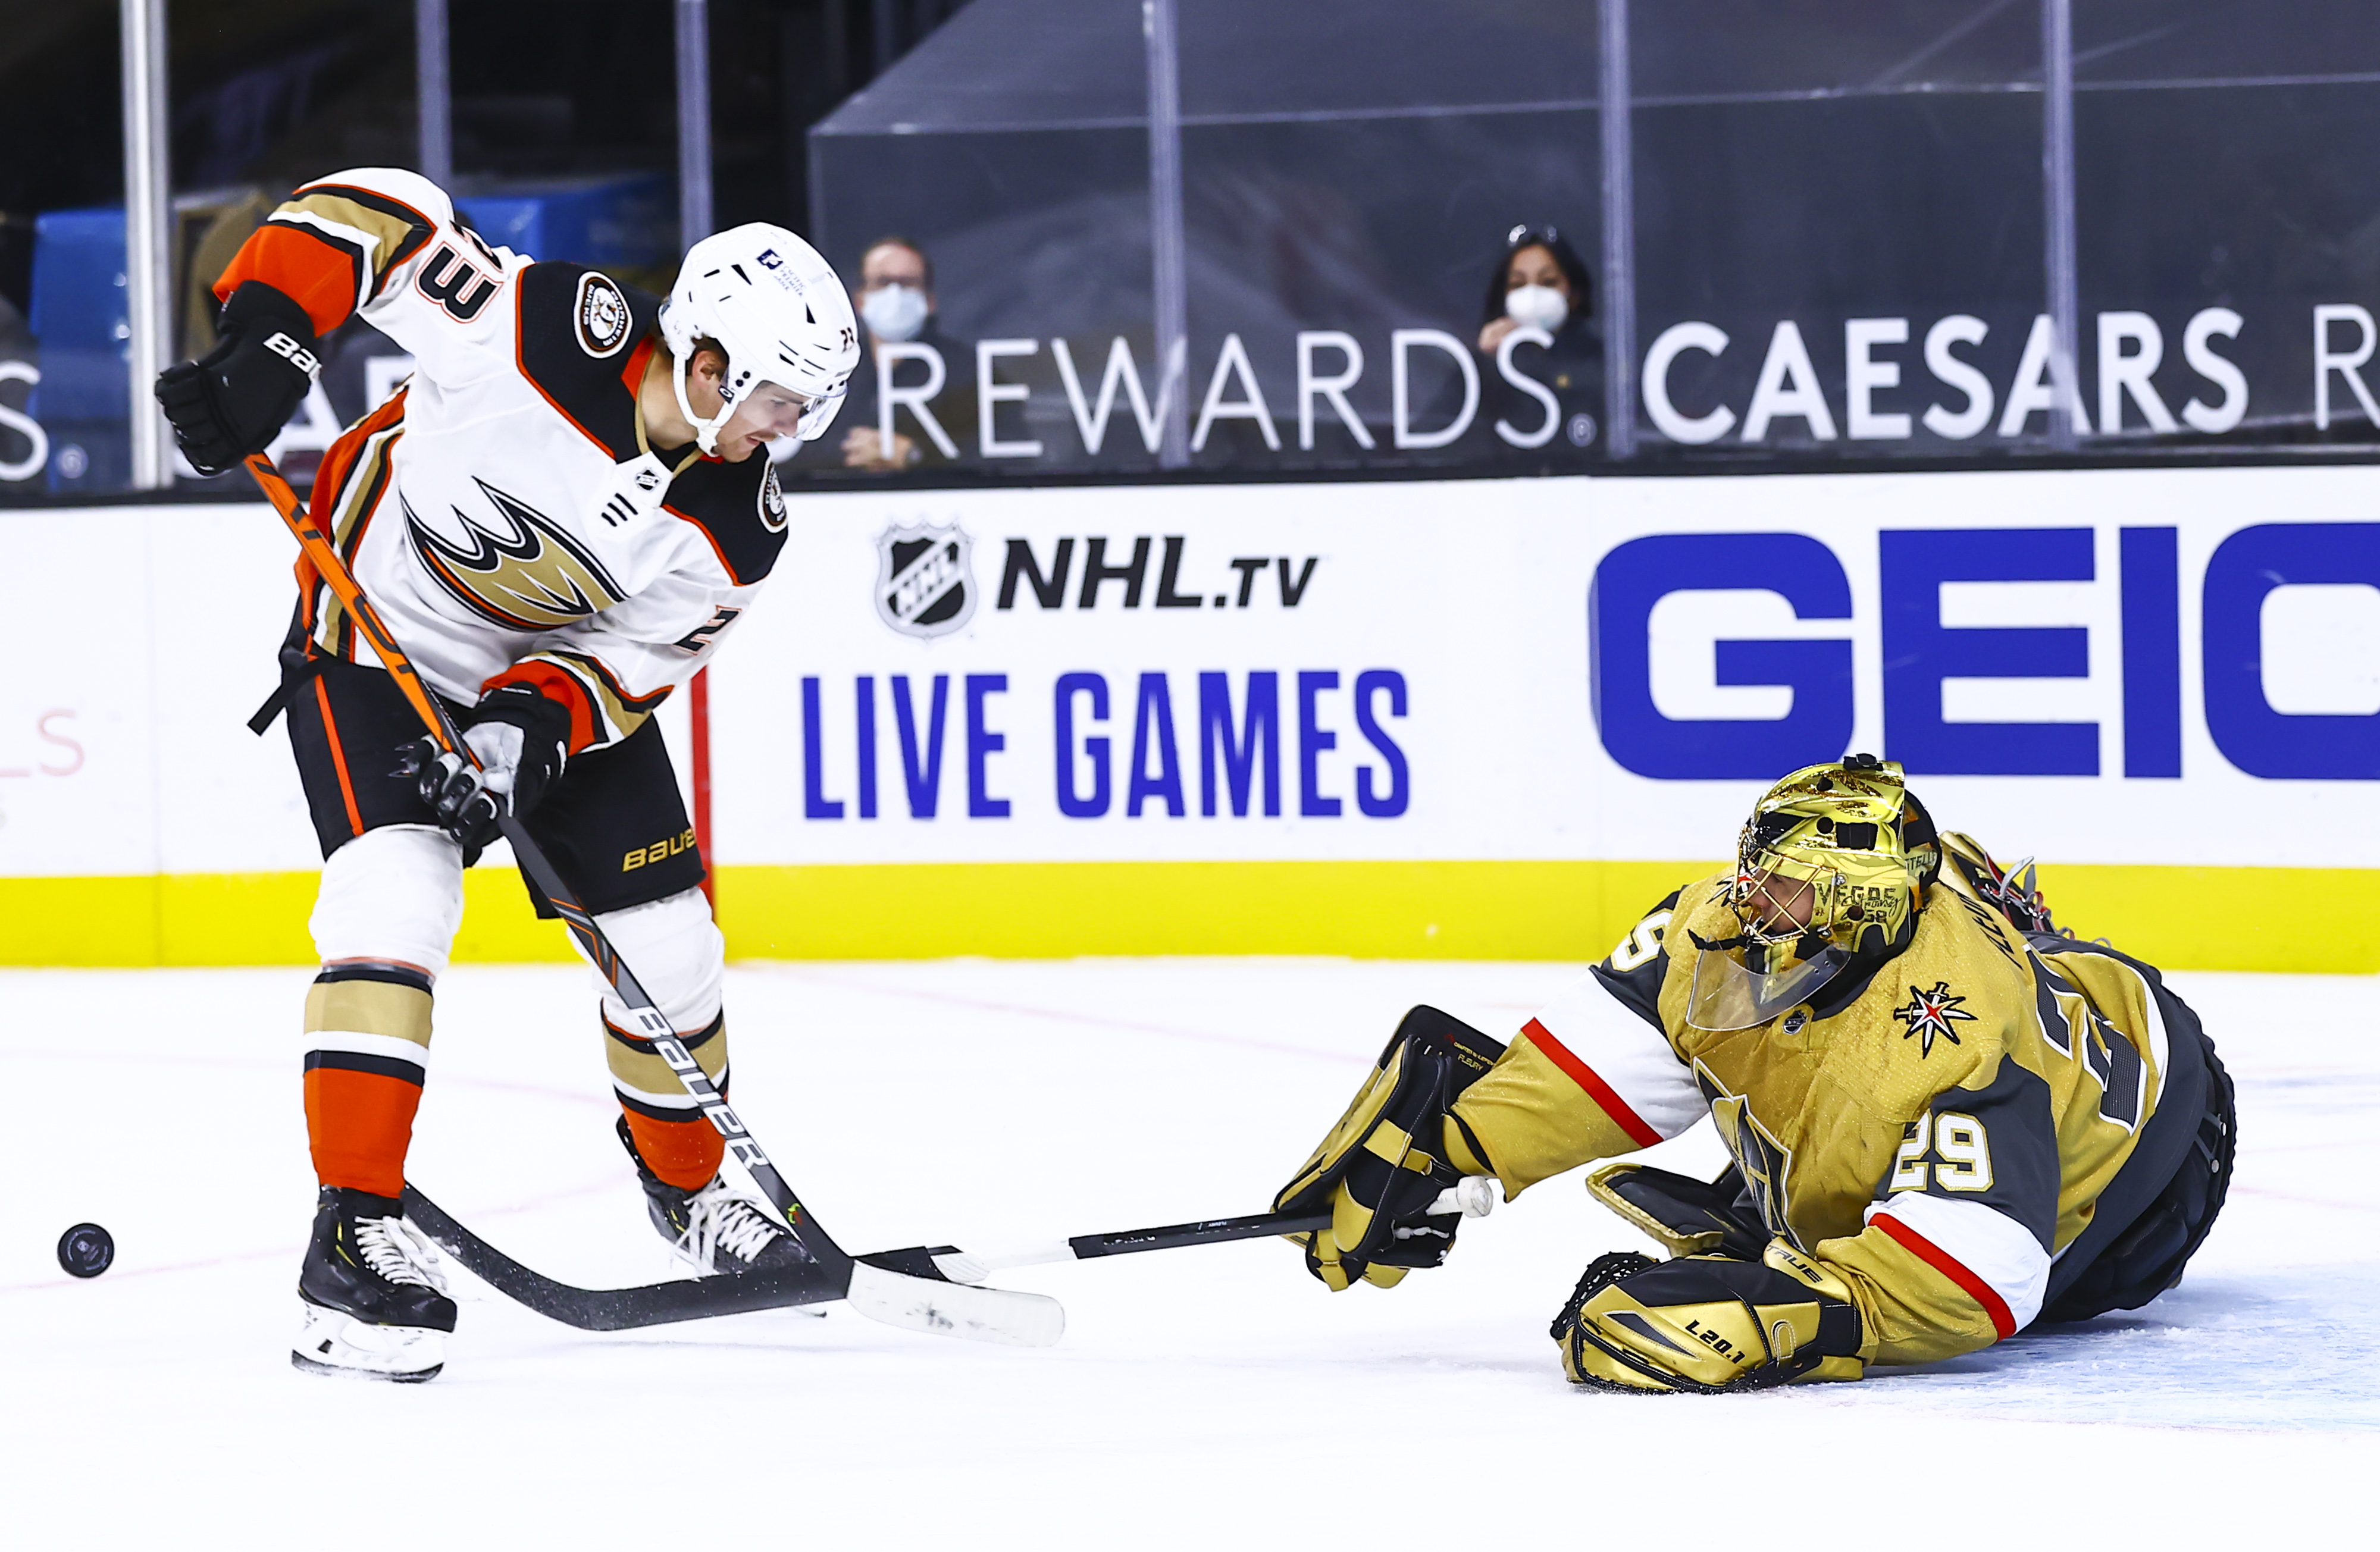 John Gibson stops 49 shots, Ducks edge Knights in shootout - The Rink Live